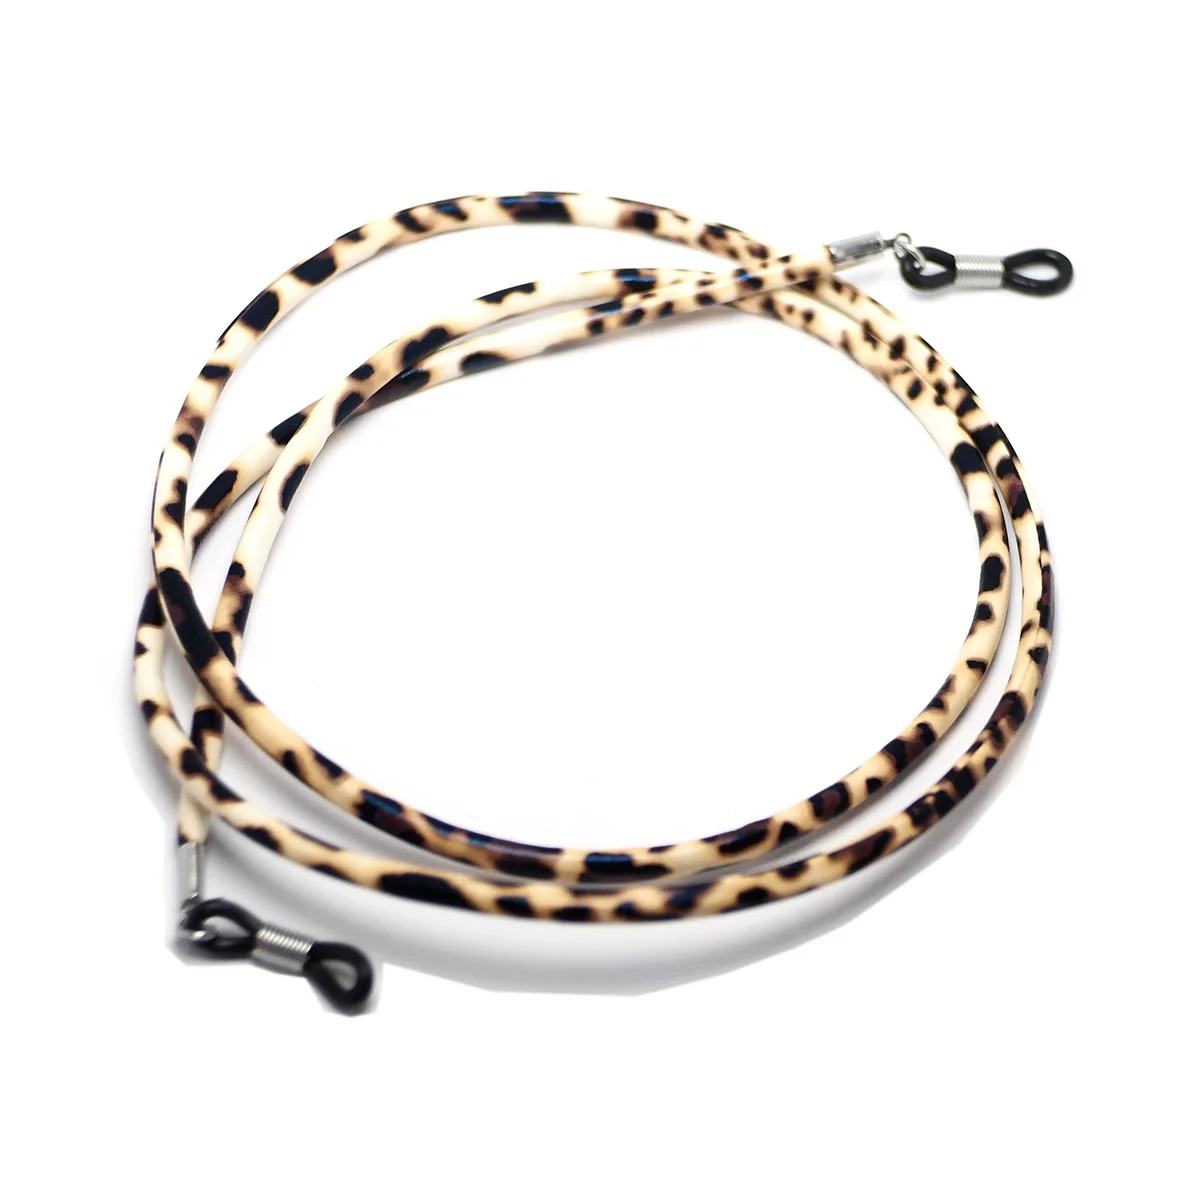 

Leopard Print Soft Leather Spectacle Strap,30 inch Sunglass Chain Rope,Anti-lost Glasses Lanyard,Handmade Spectacle Holder Chain